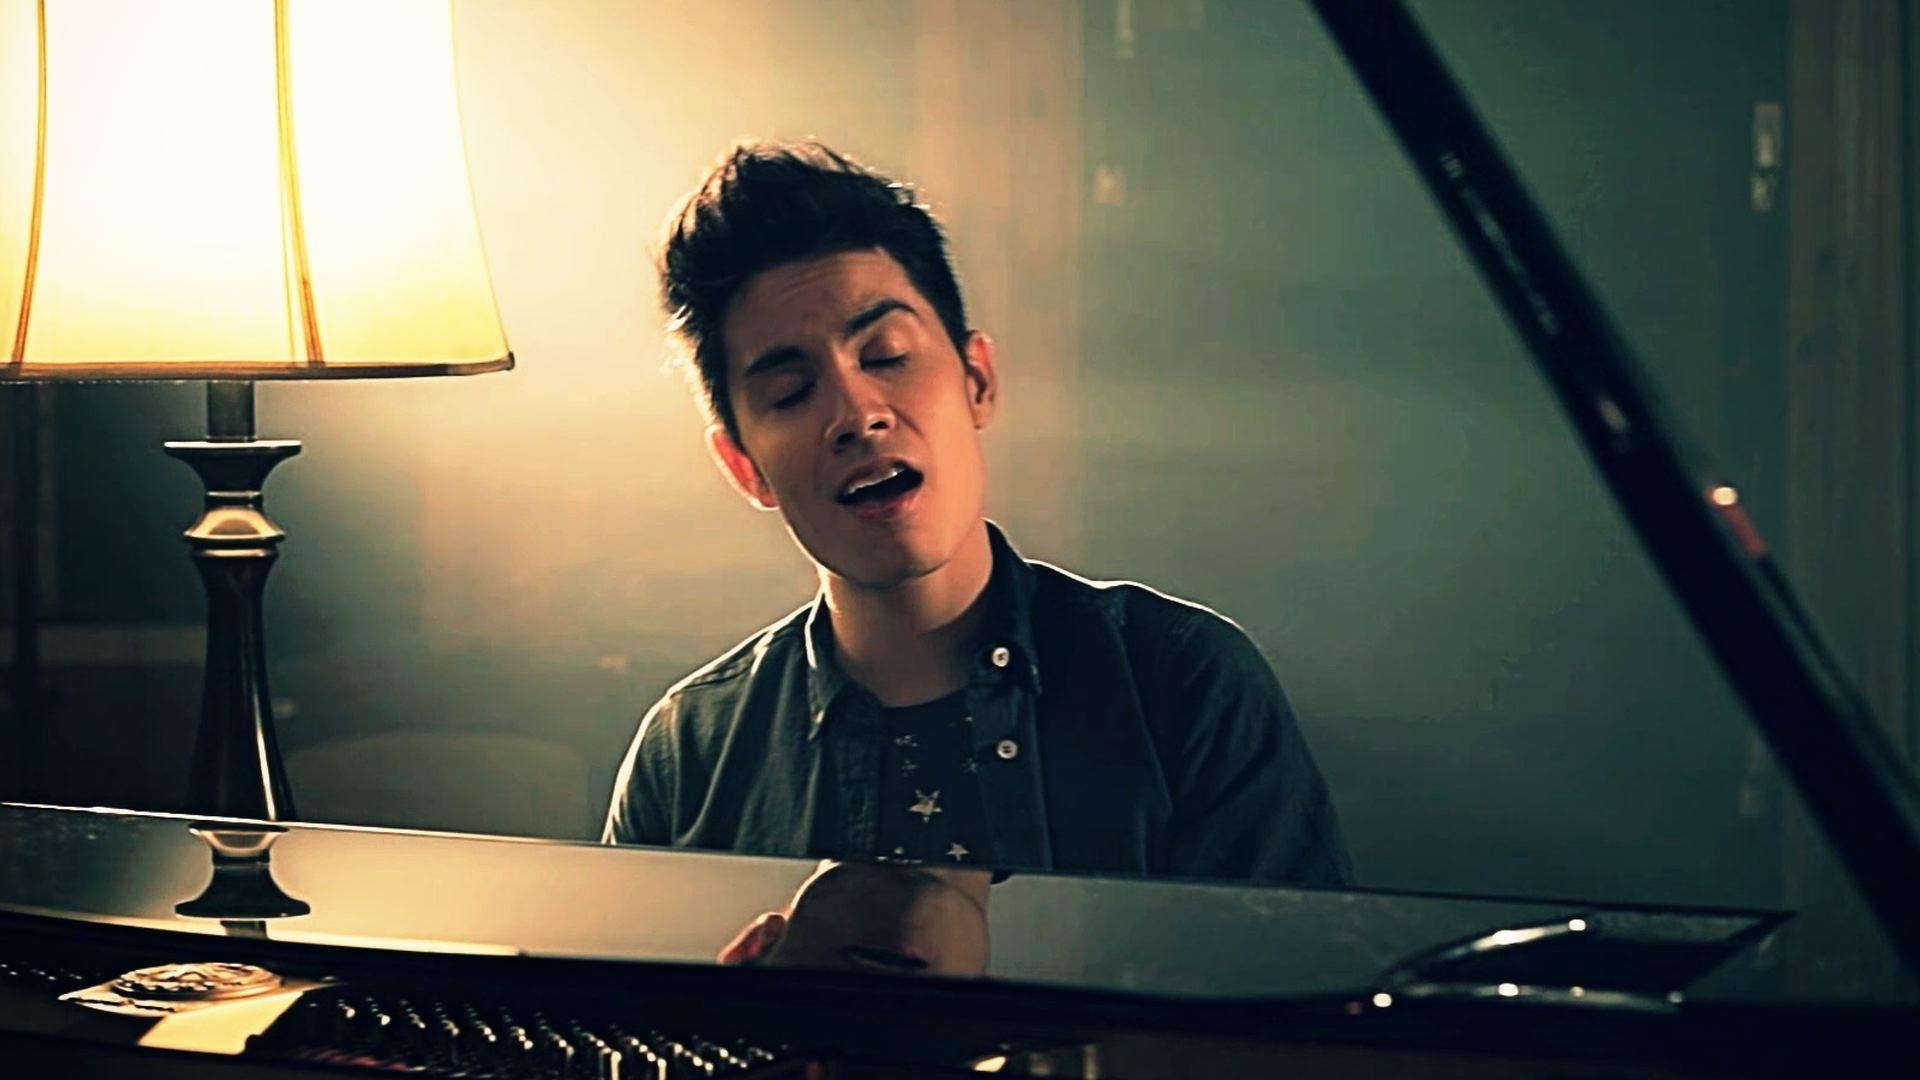 Sam Tsui covers the song "Come And Get It" - Selena Gomez